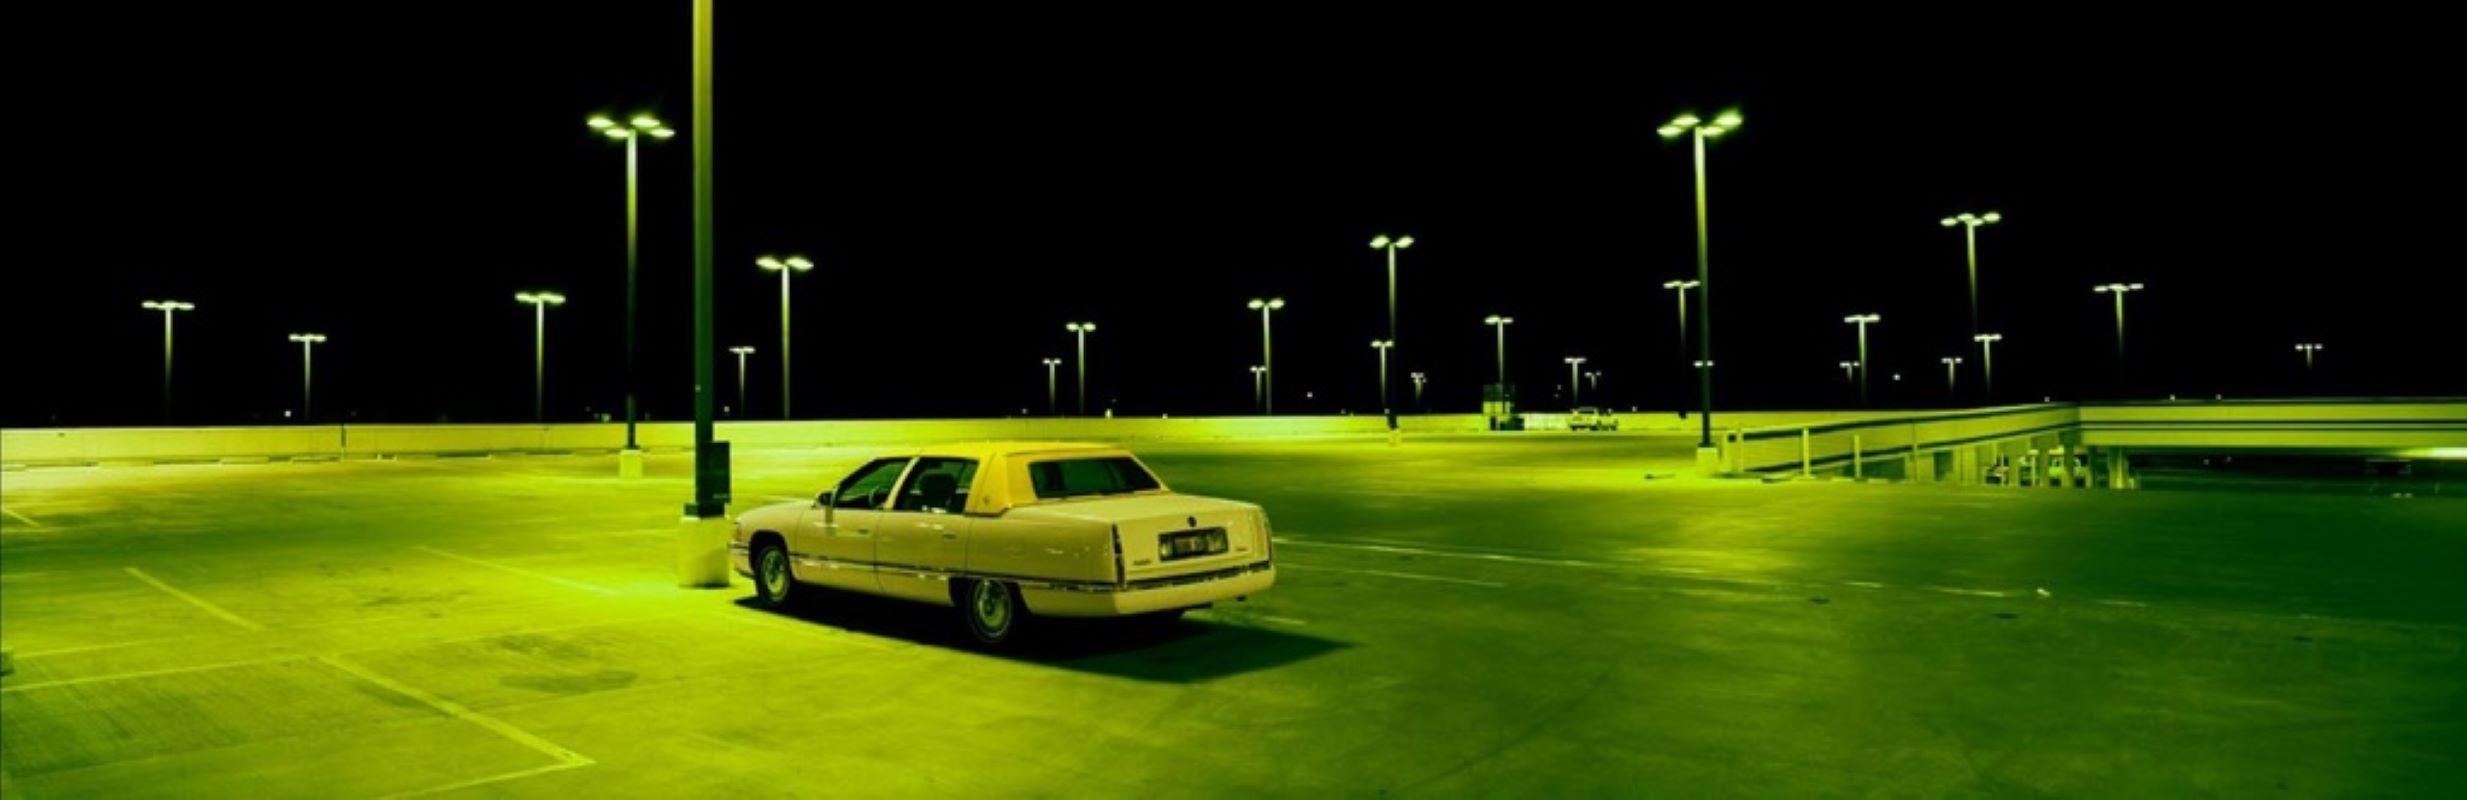 Albert Watson Still-Life Photograph - Cadillac in Parking Lot, Las Vegas - the car in the dark with lights in green